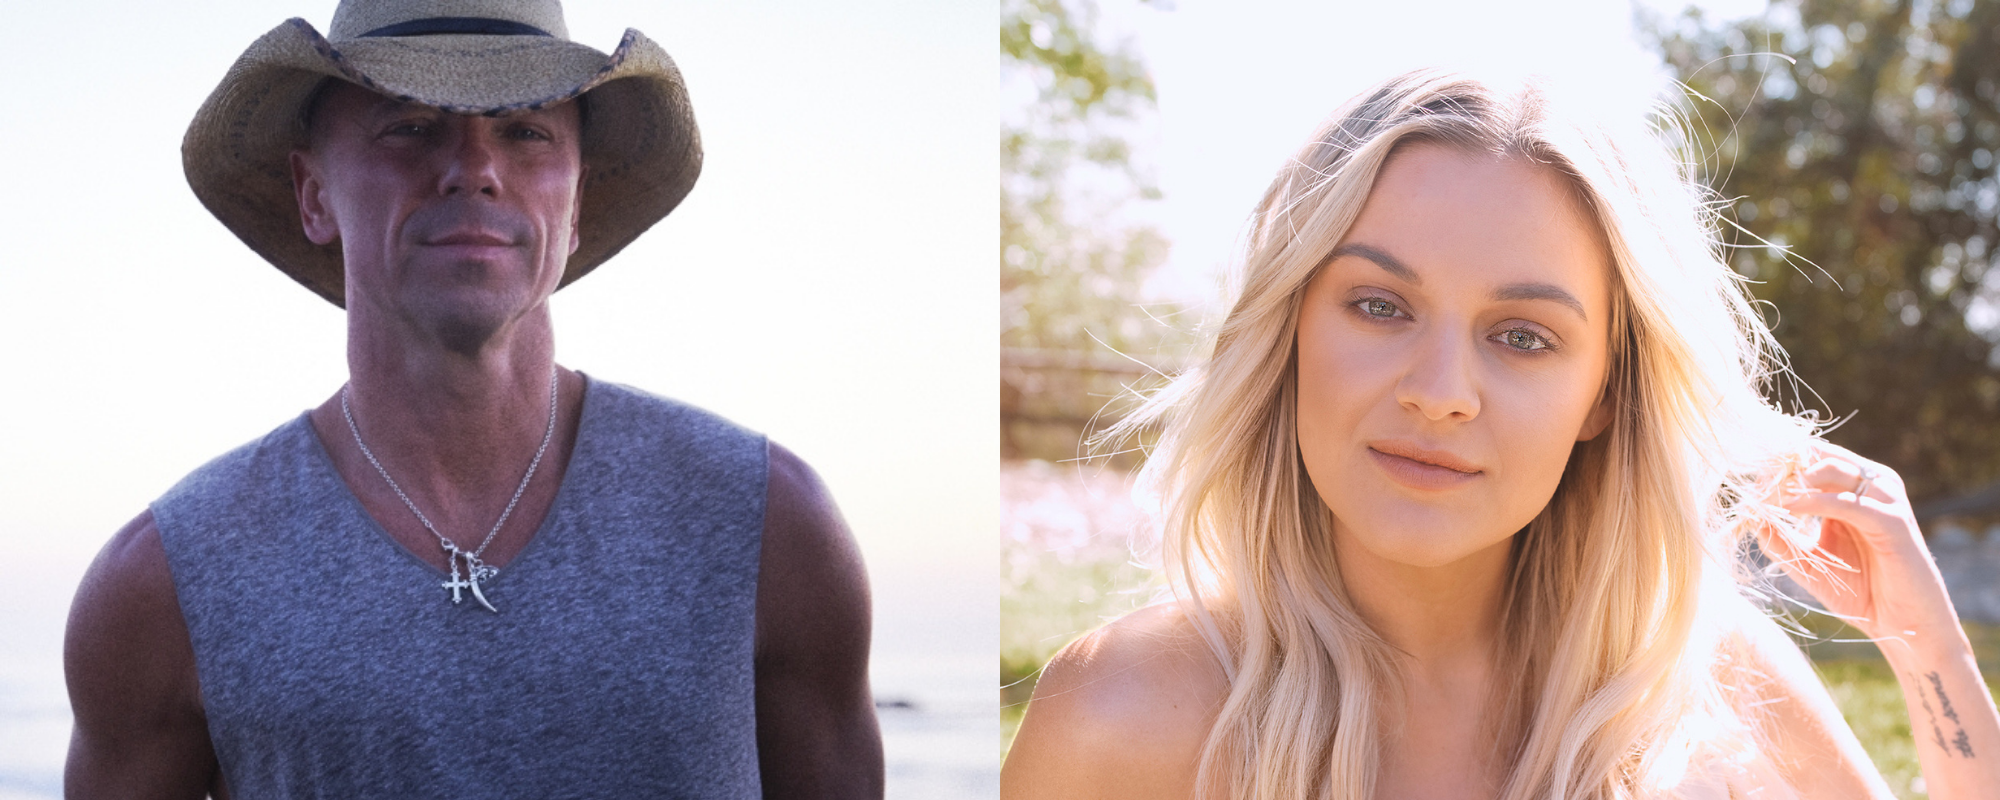 Kelsea Ballerini & Kenny Chesney Honor Their Shared East Tennessee Roots on “half of my hometown”